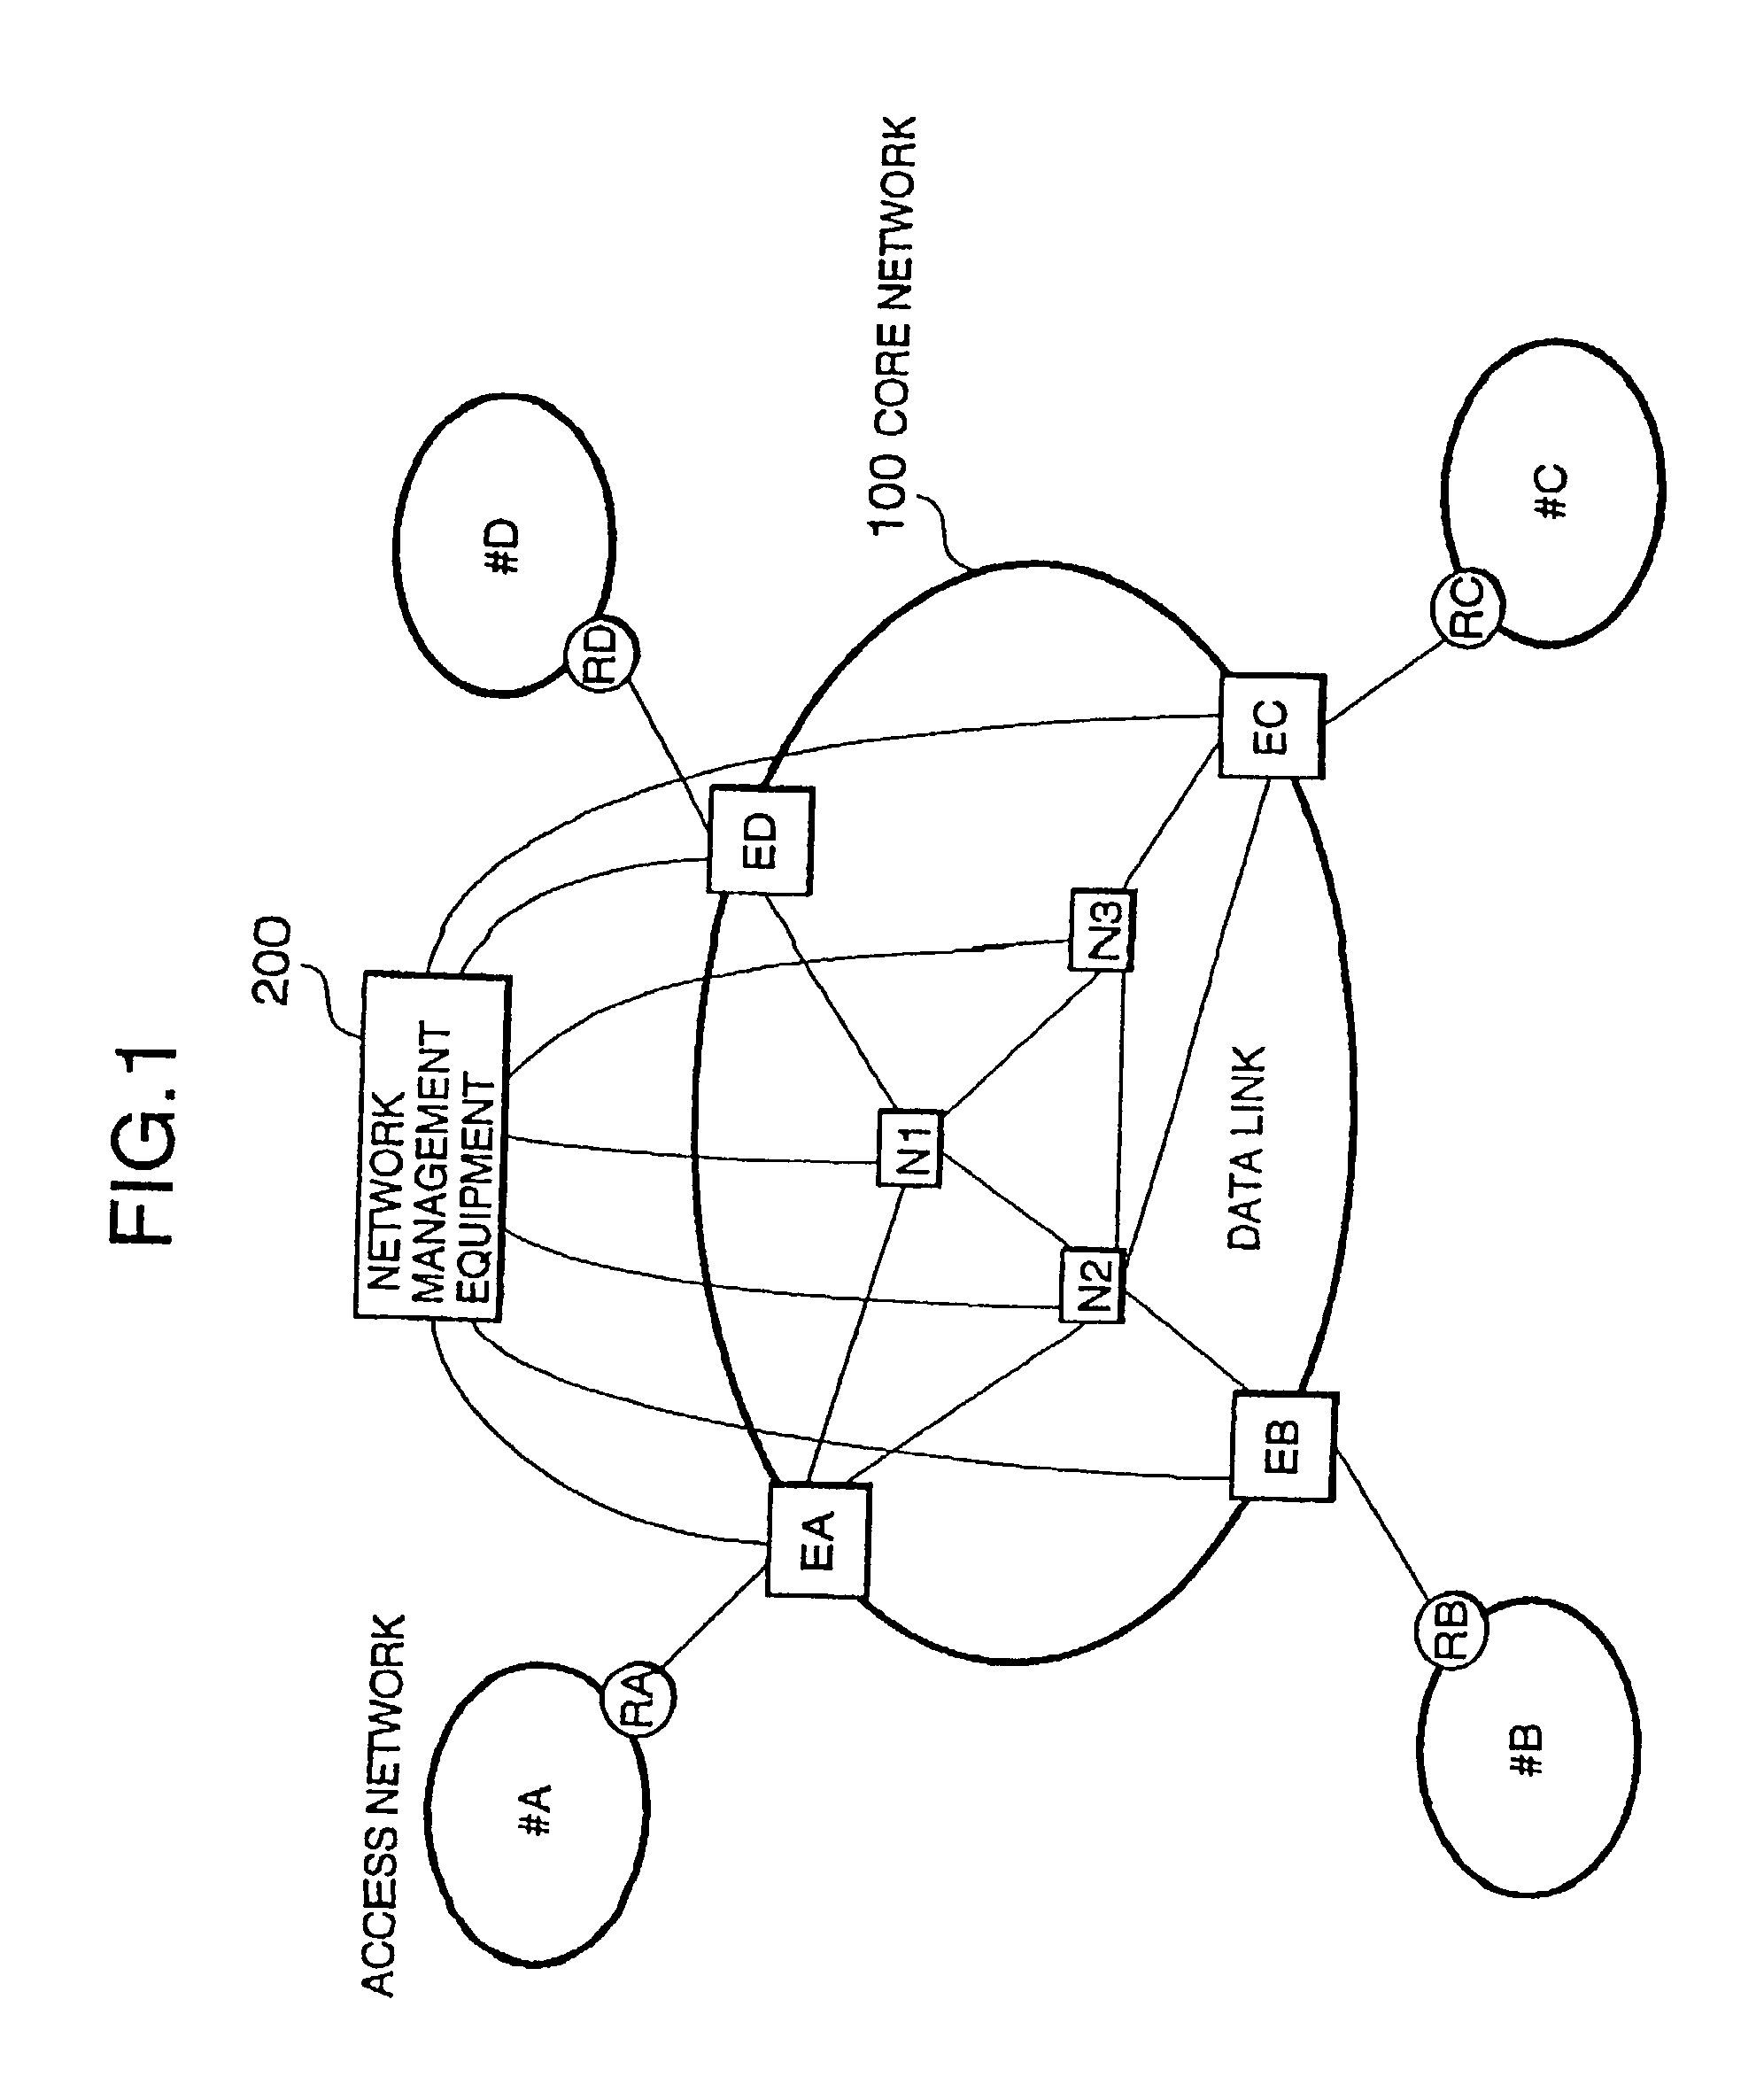 Packet switching network, packet switching equipment and network management equipment